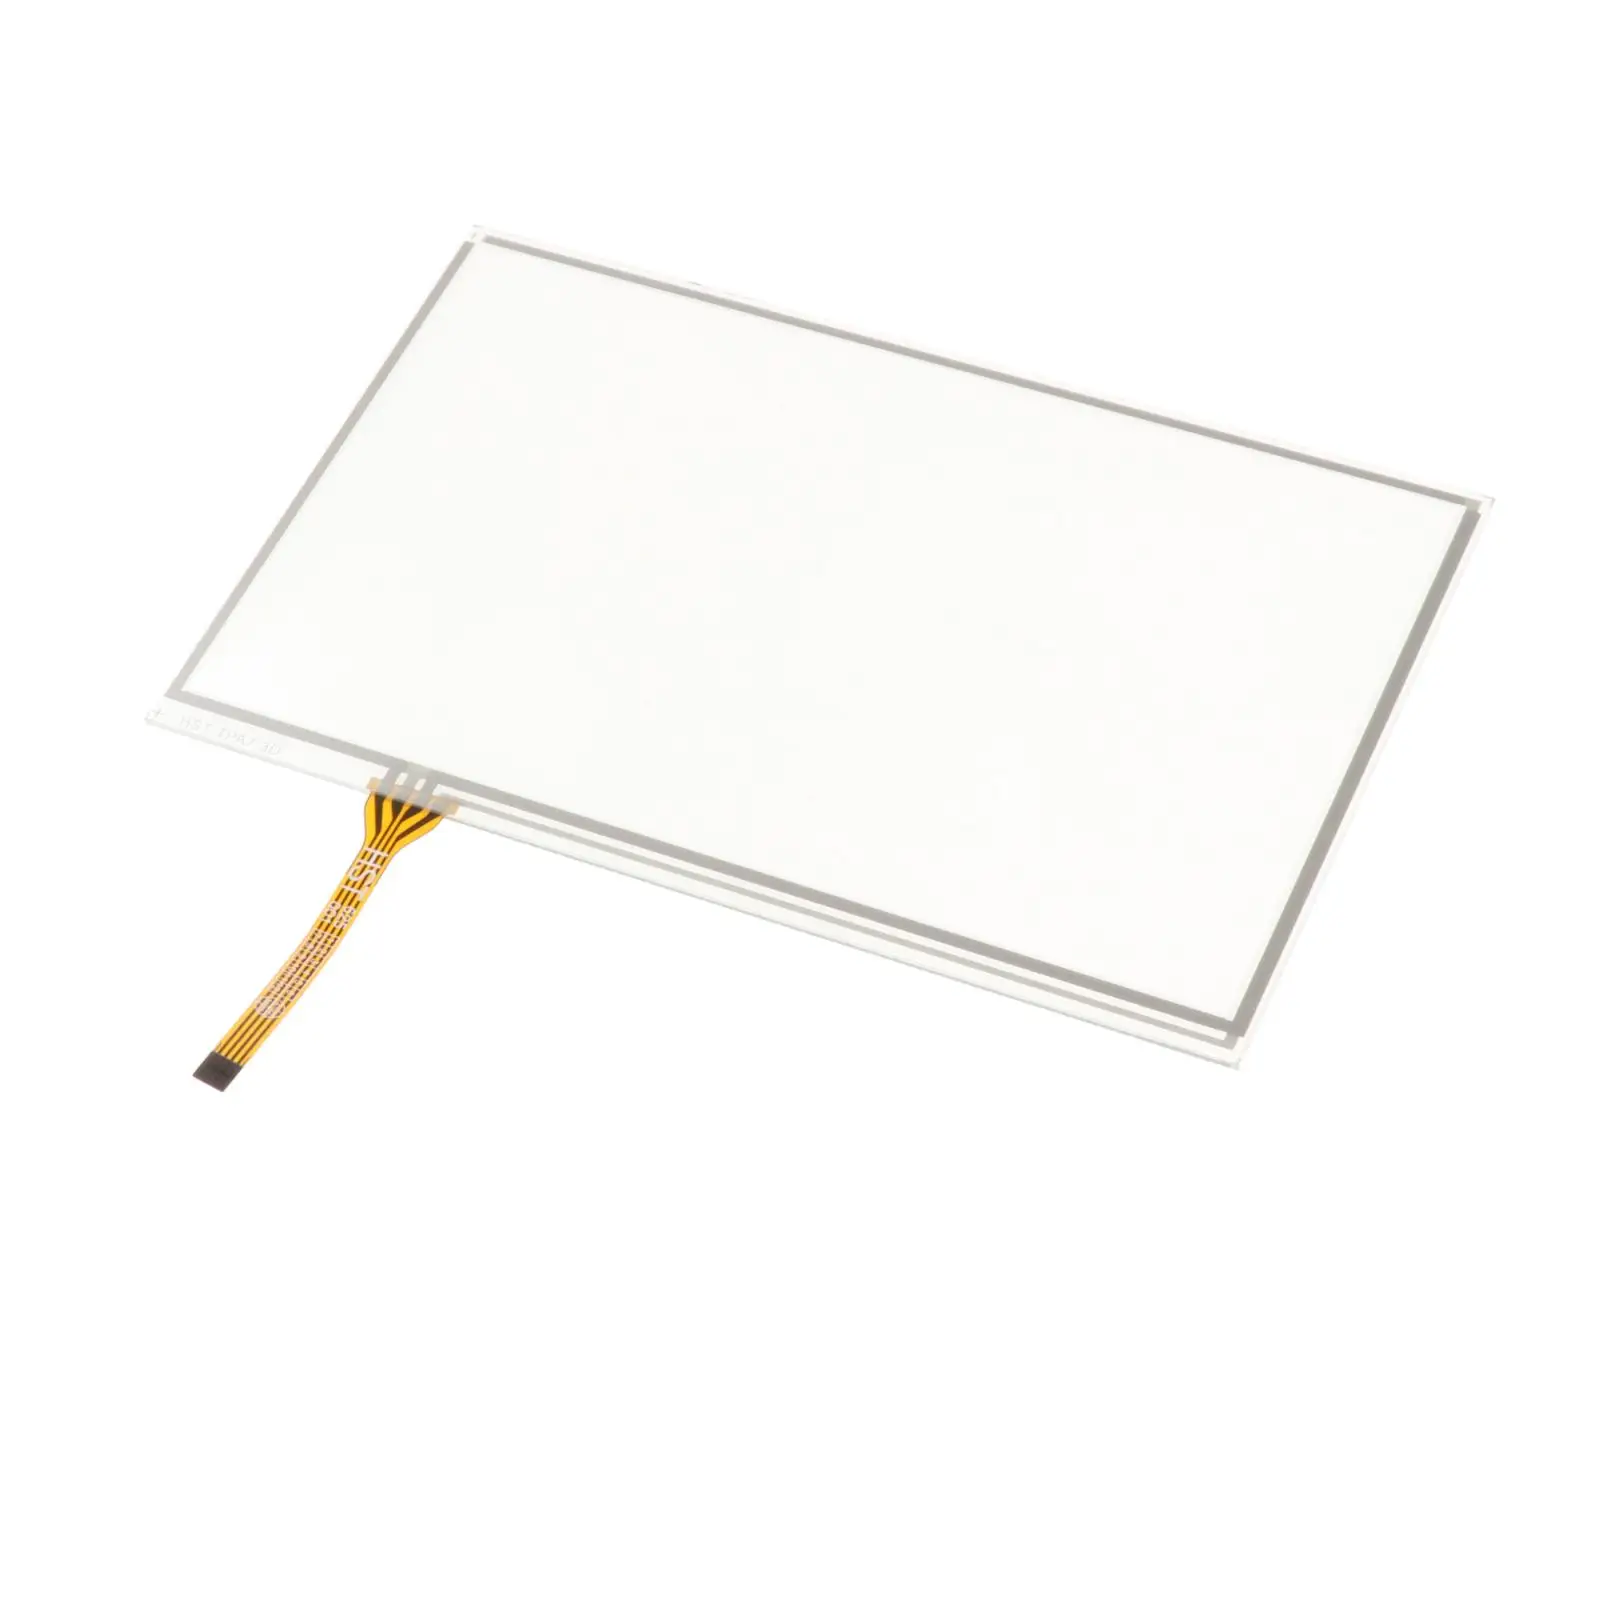 New Touch Screen Glass Digitizer for Lexus IS250 IS300 IS350 ISF GS Prius Navigation